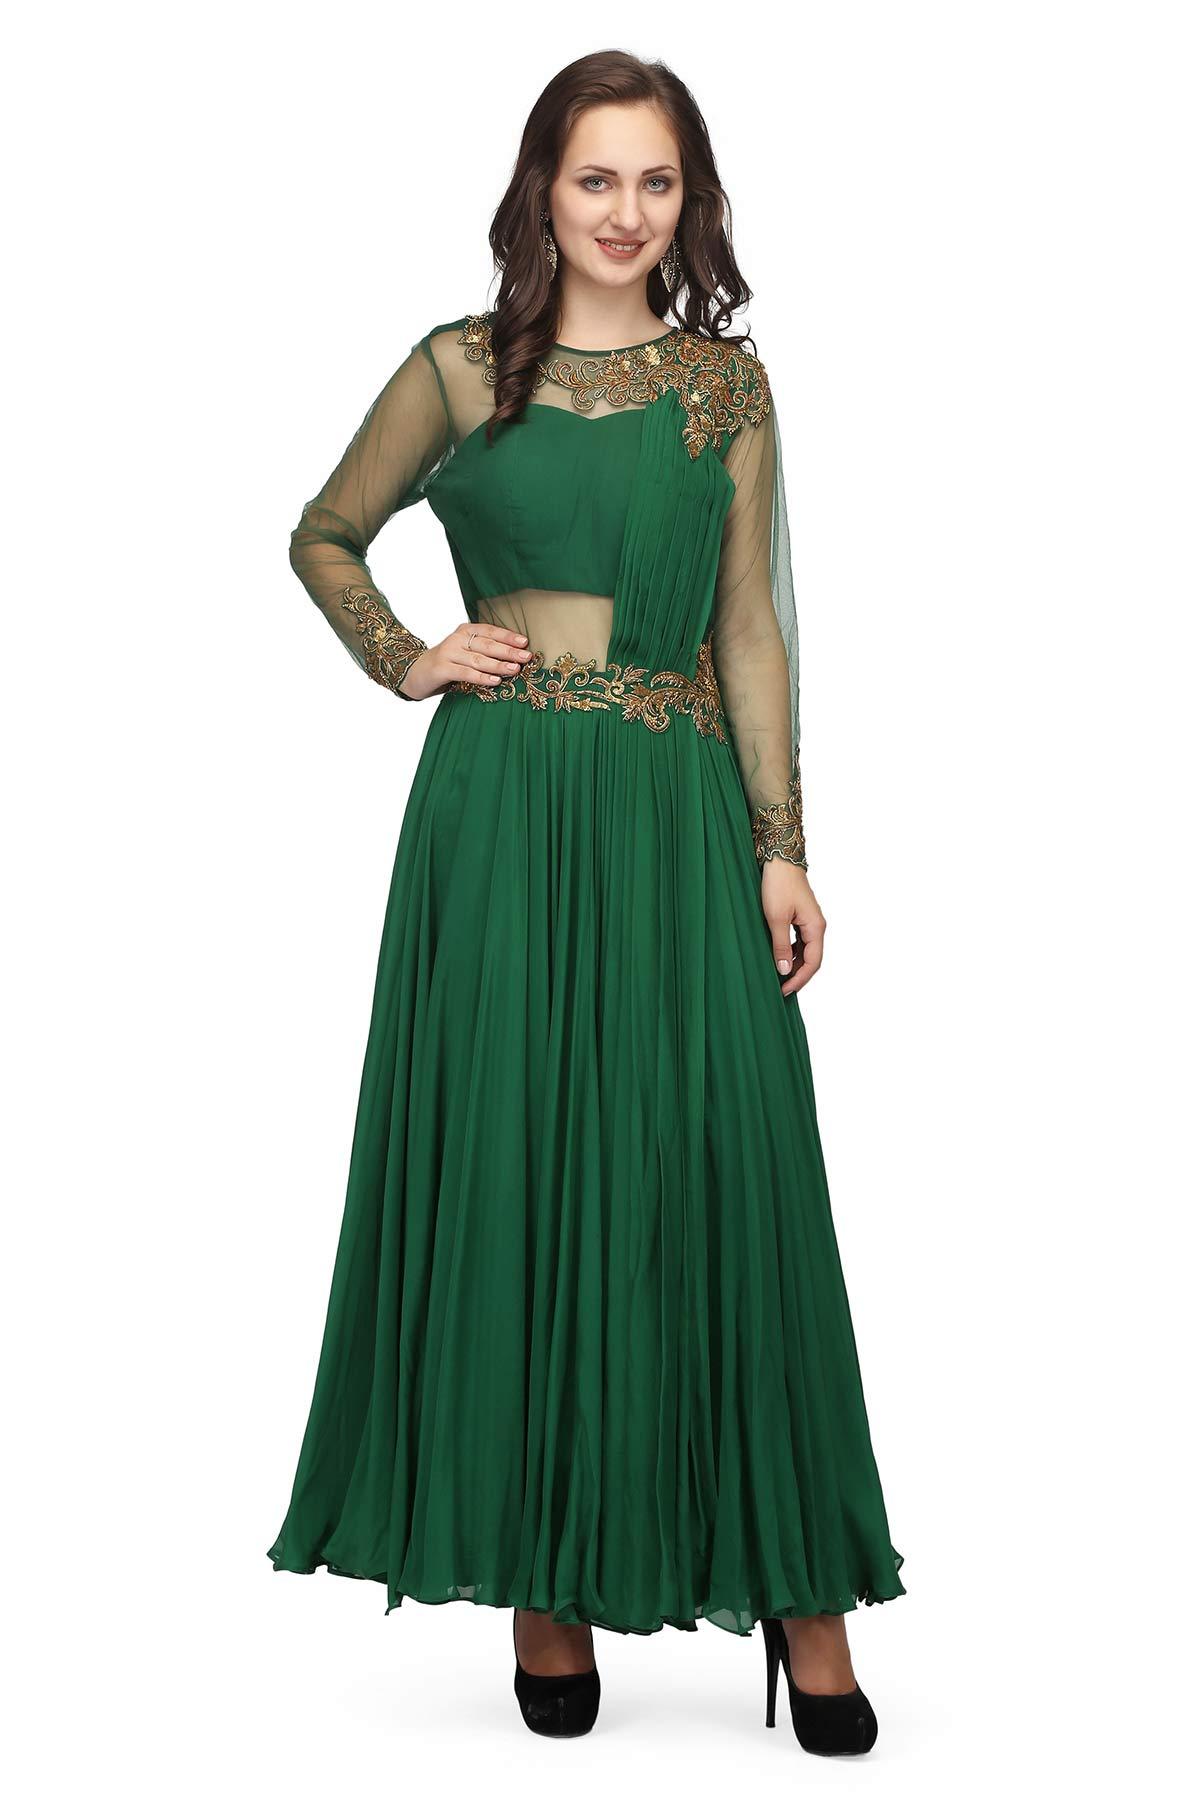 Discover 71+ emerald green gown for rent